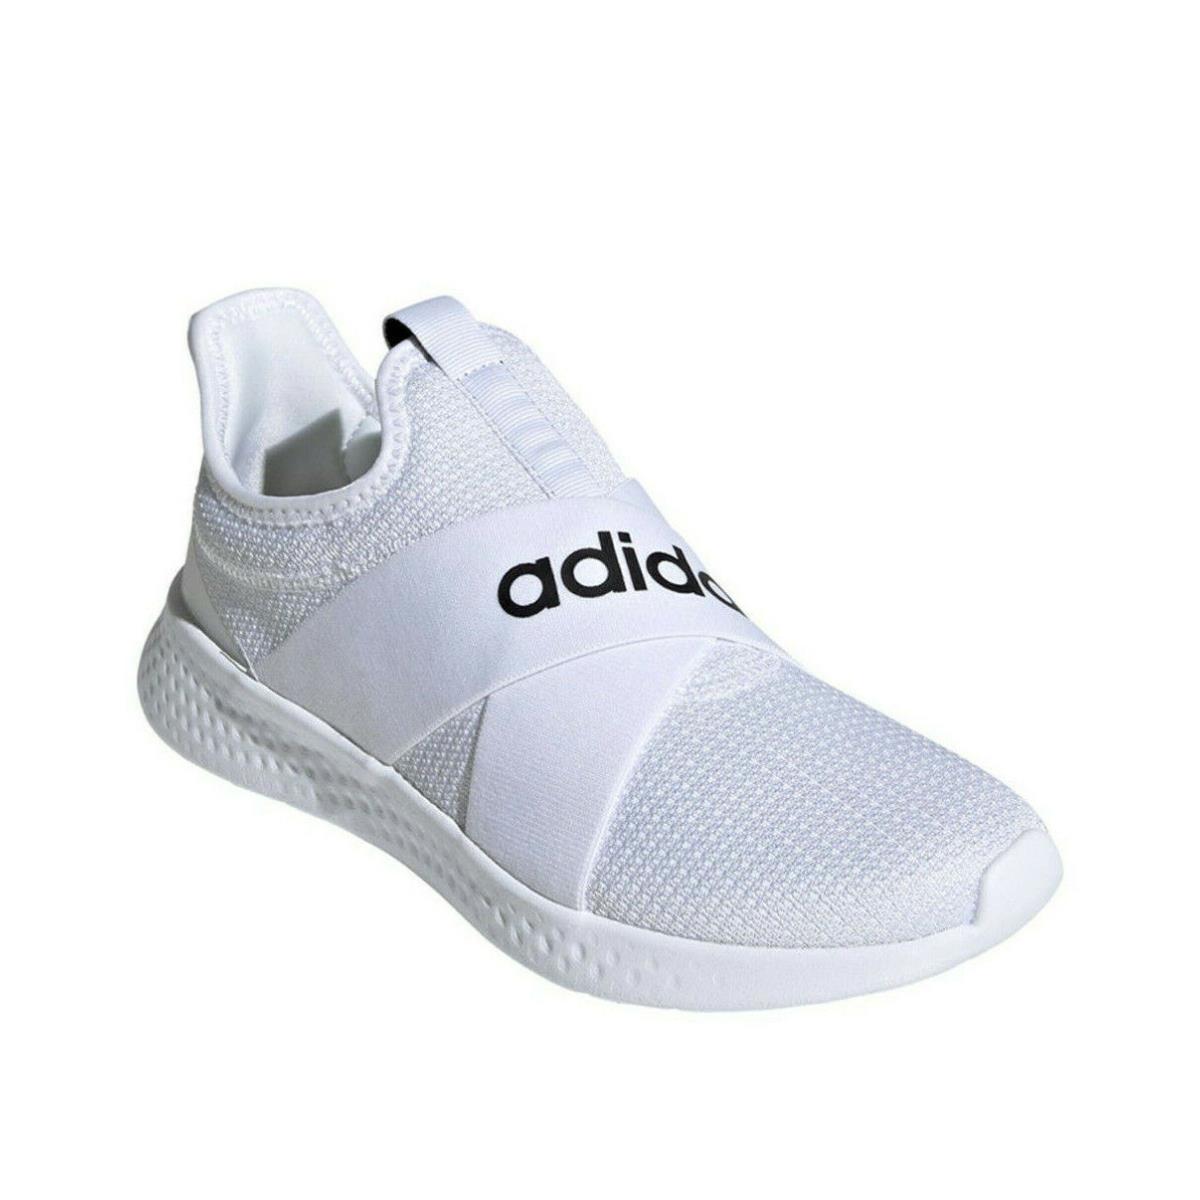 Adidas Puremotion Adapt Slip-on Sneaker Running Shoes White Silver Women`s